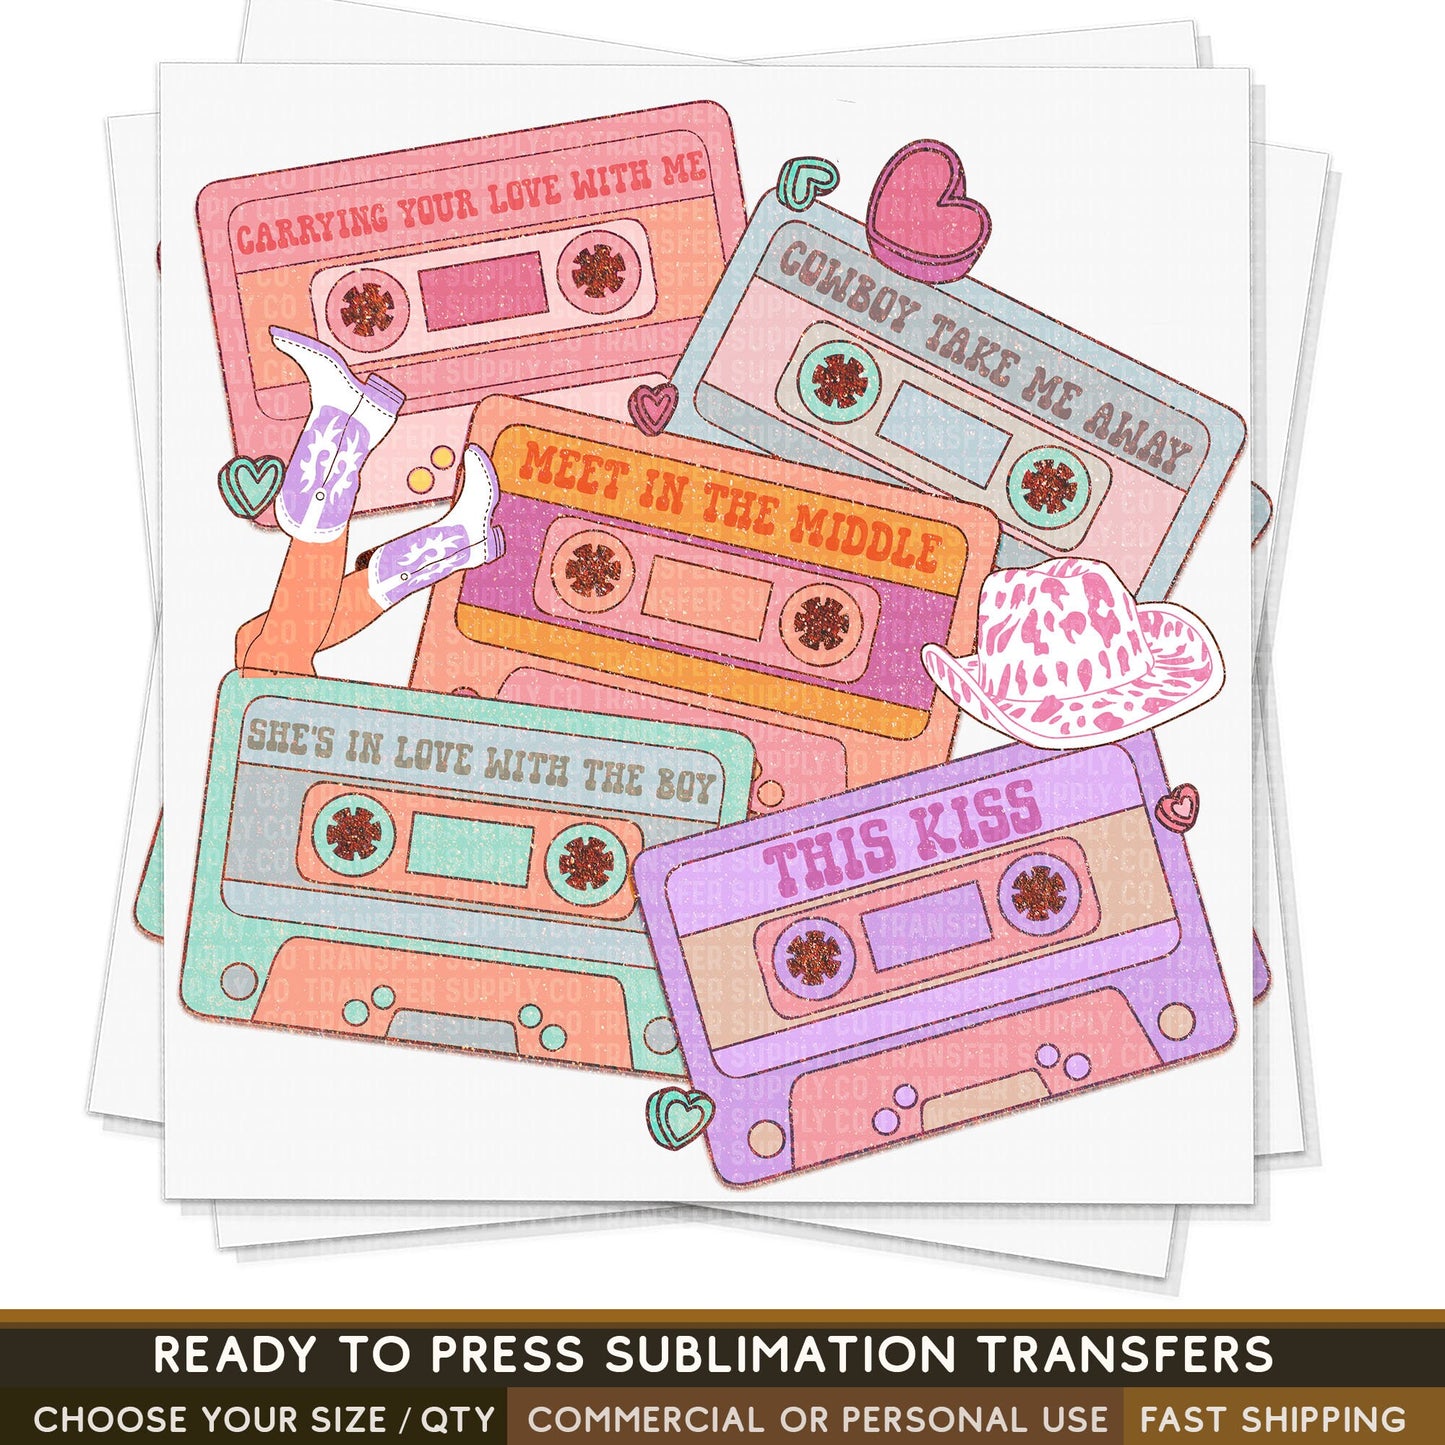 Western 90s Country Love Songs Cassettes, READY TO PRESS Sublimation Transfer, Western Sublimation Transfer, Western Sublimation Print